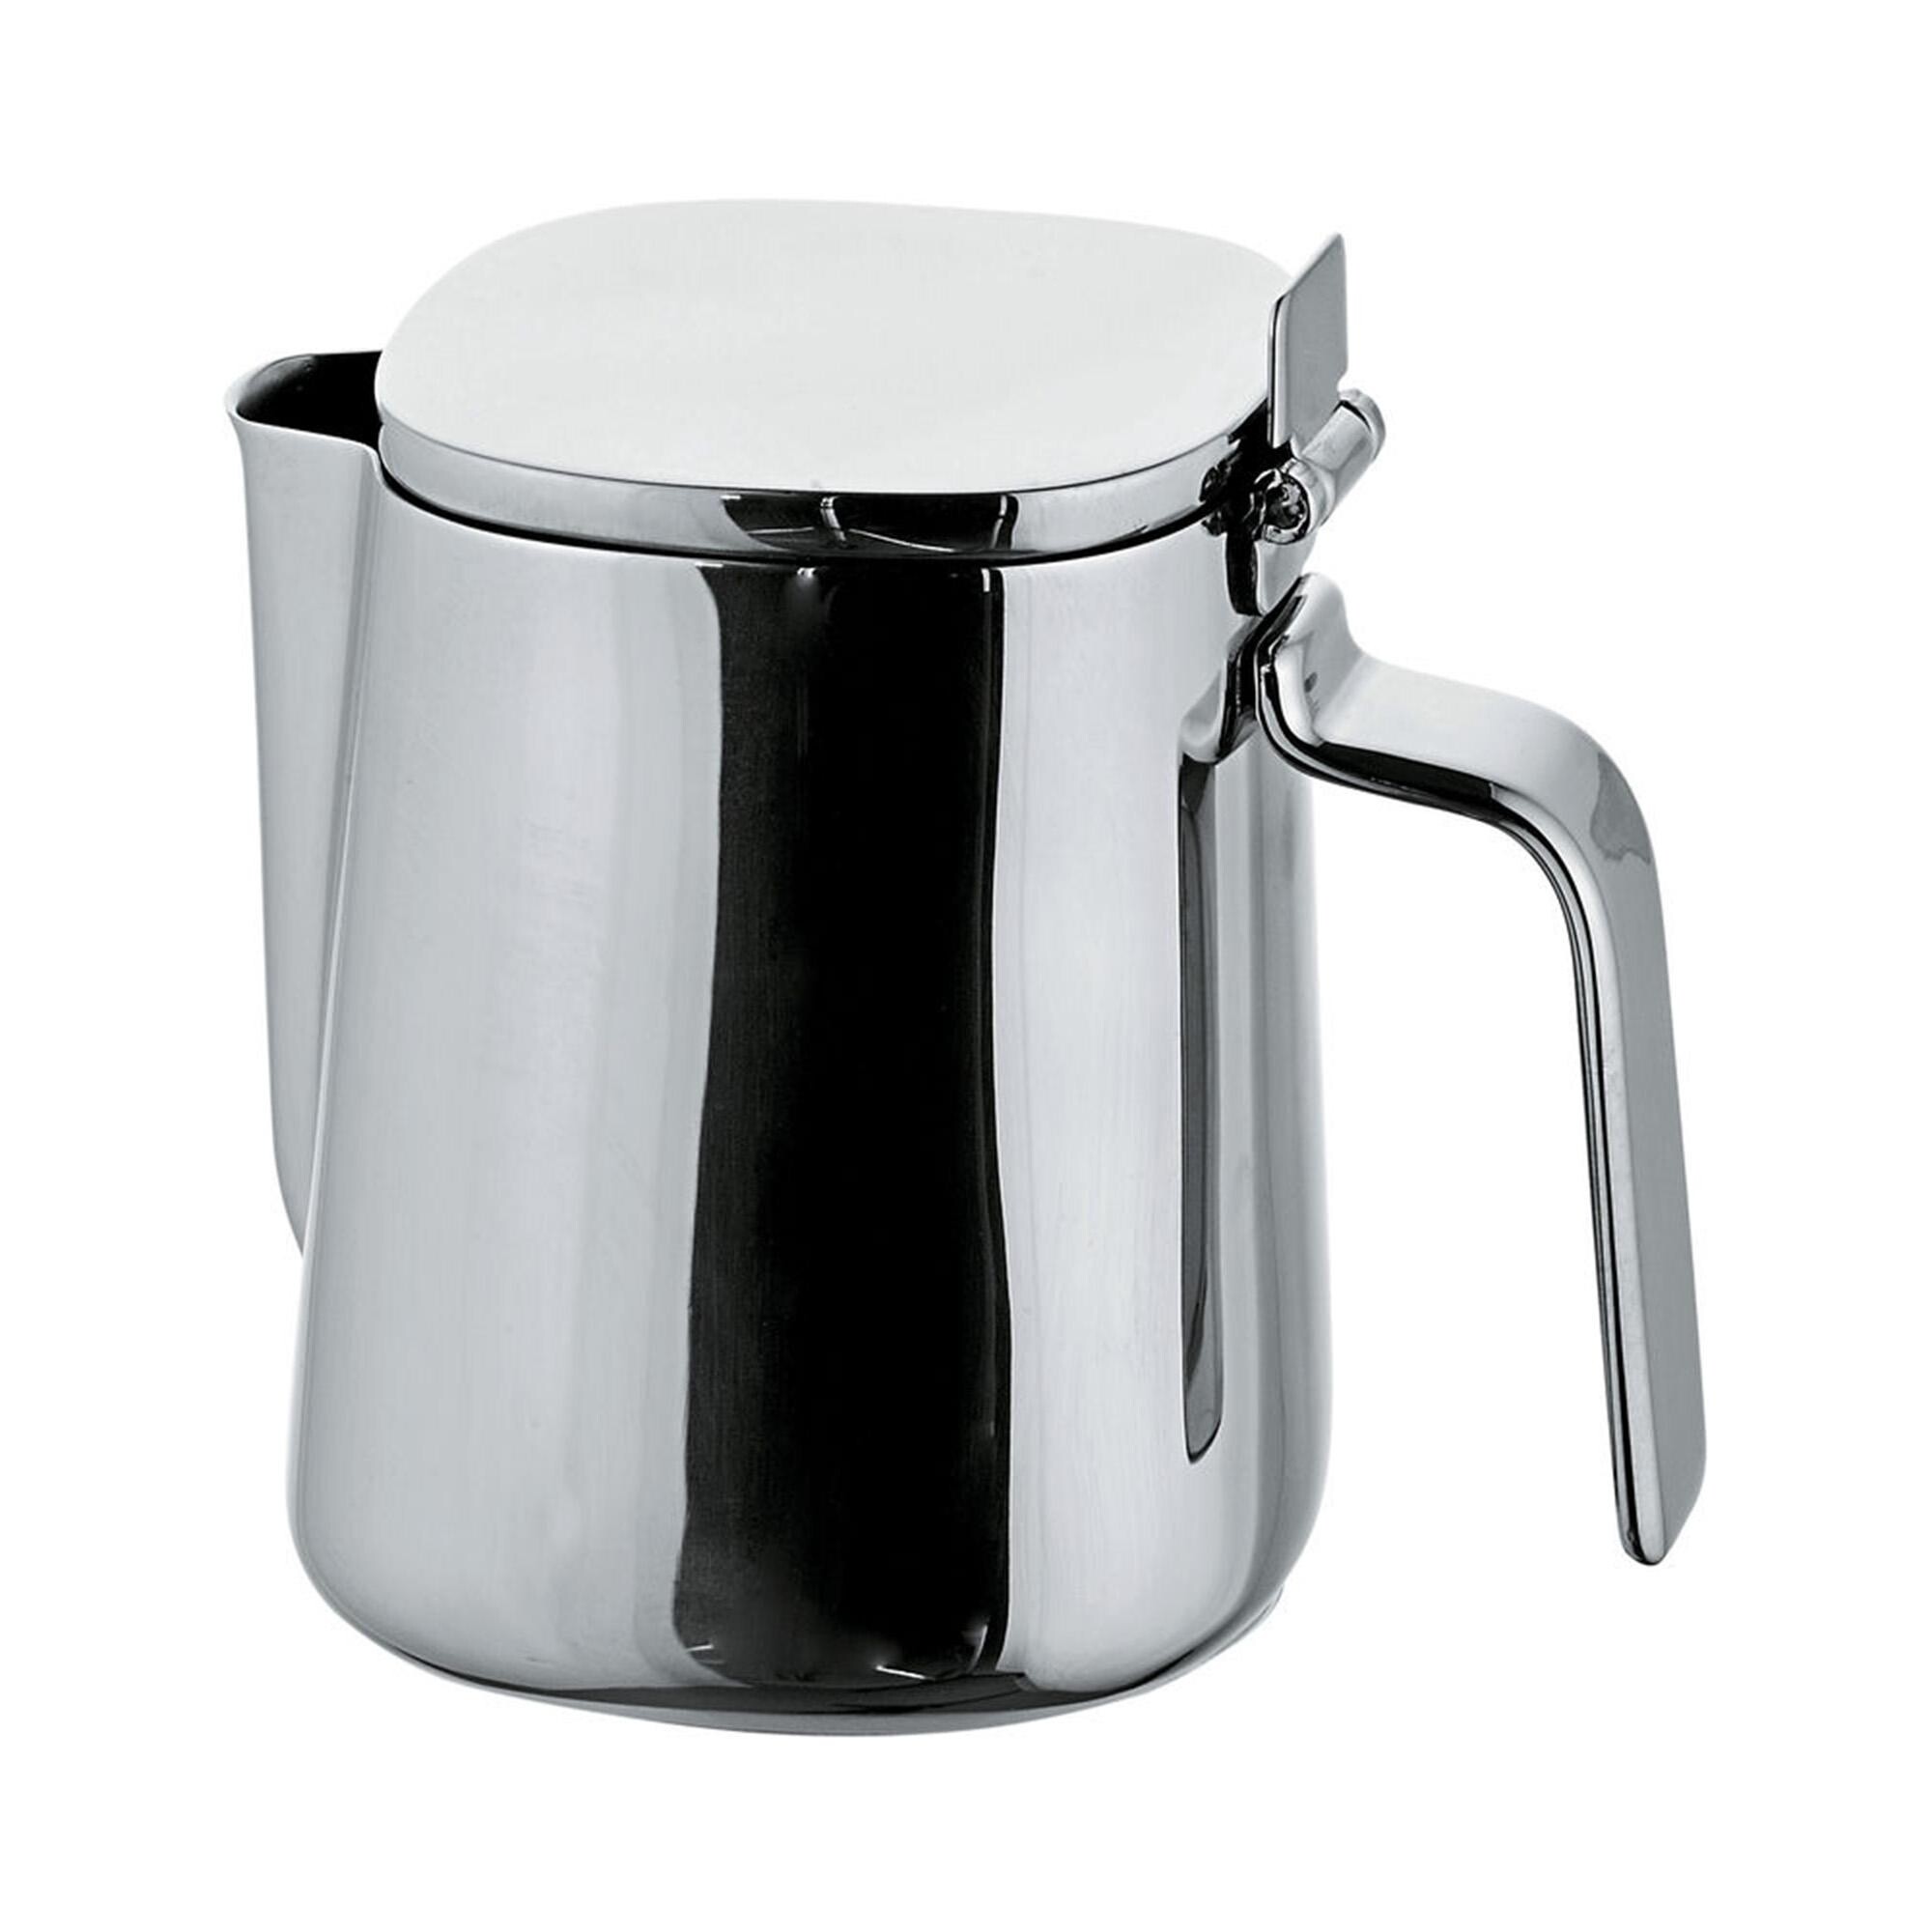 Alessi 20 cl Sugar Bowl in 18/10 Stainless Steel Mirror Polished